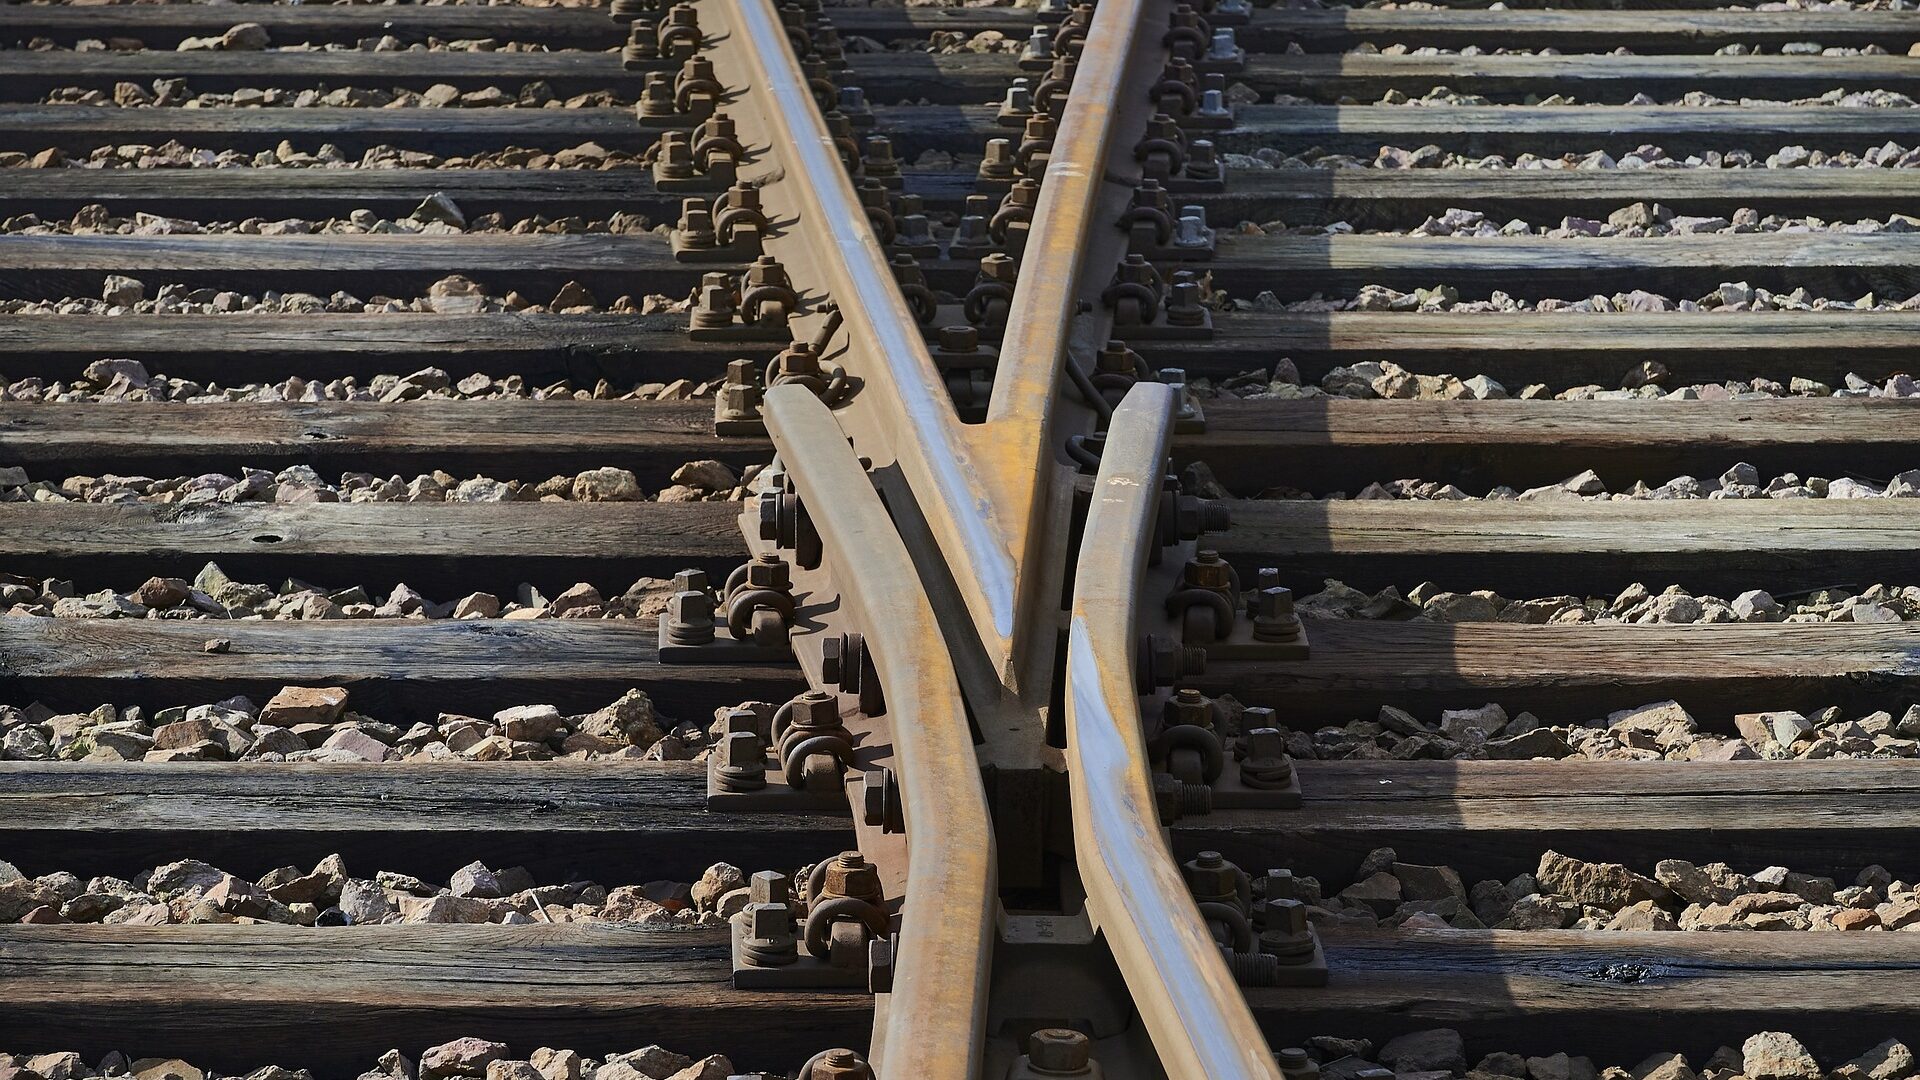 Image of diverging railroad tracks by Paul Henri Degrande from Pixabay